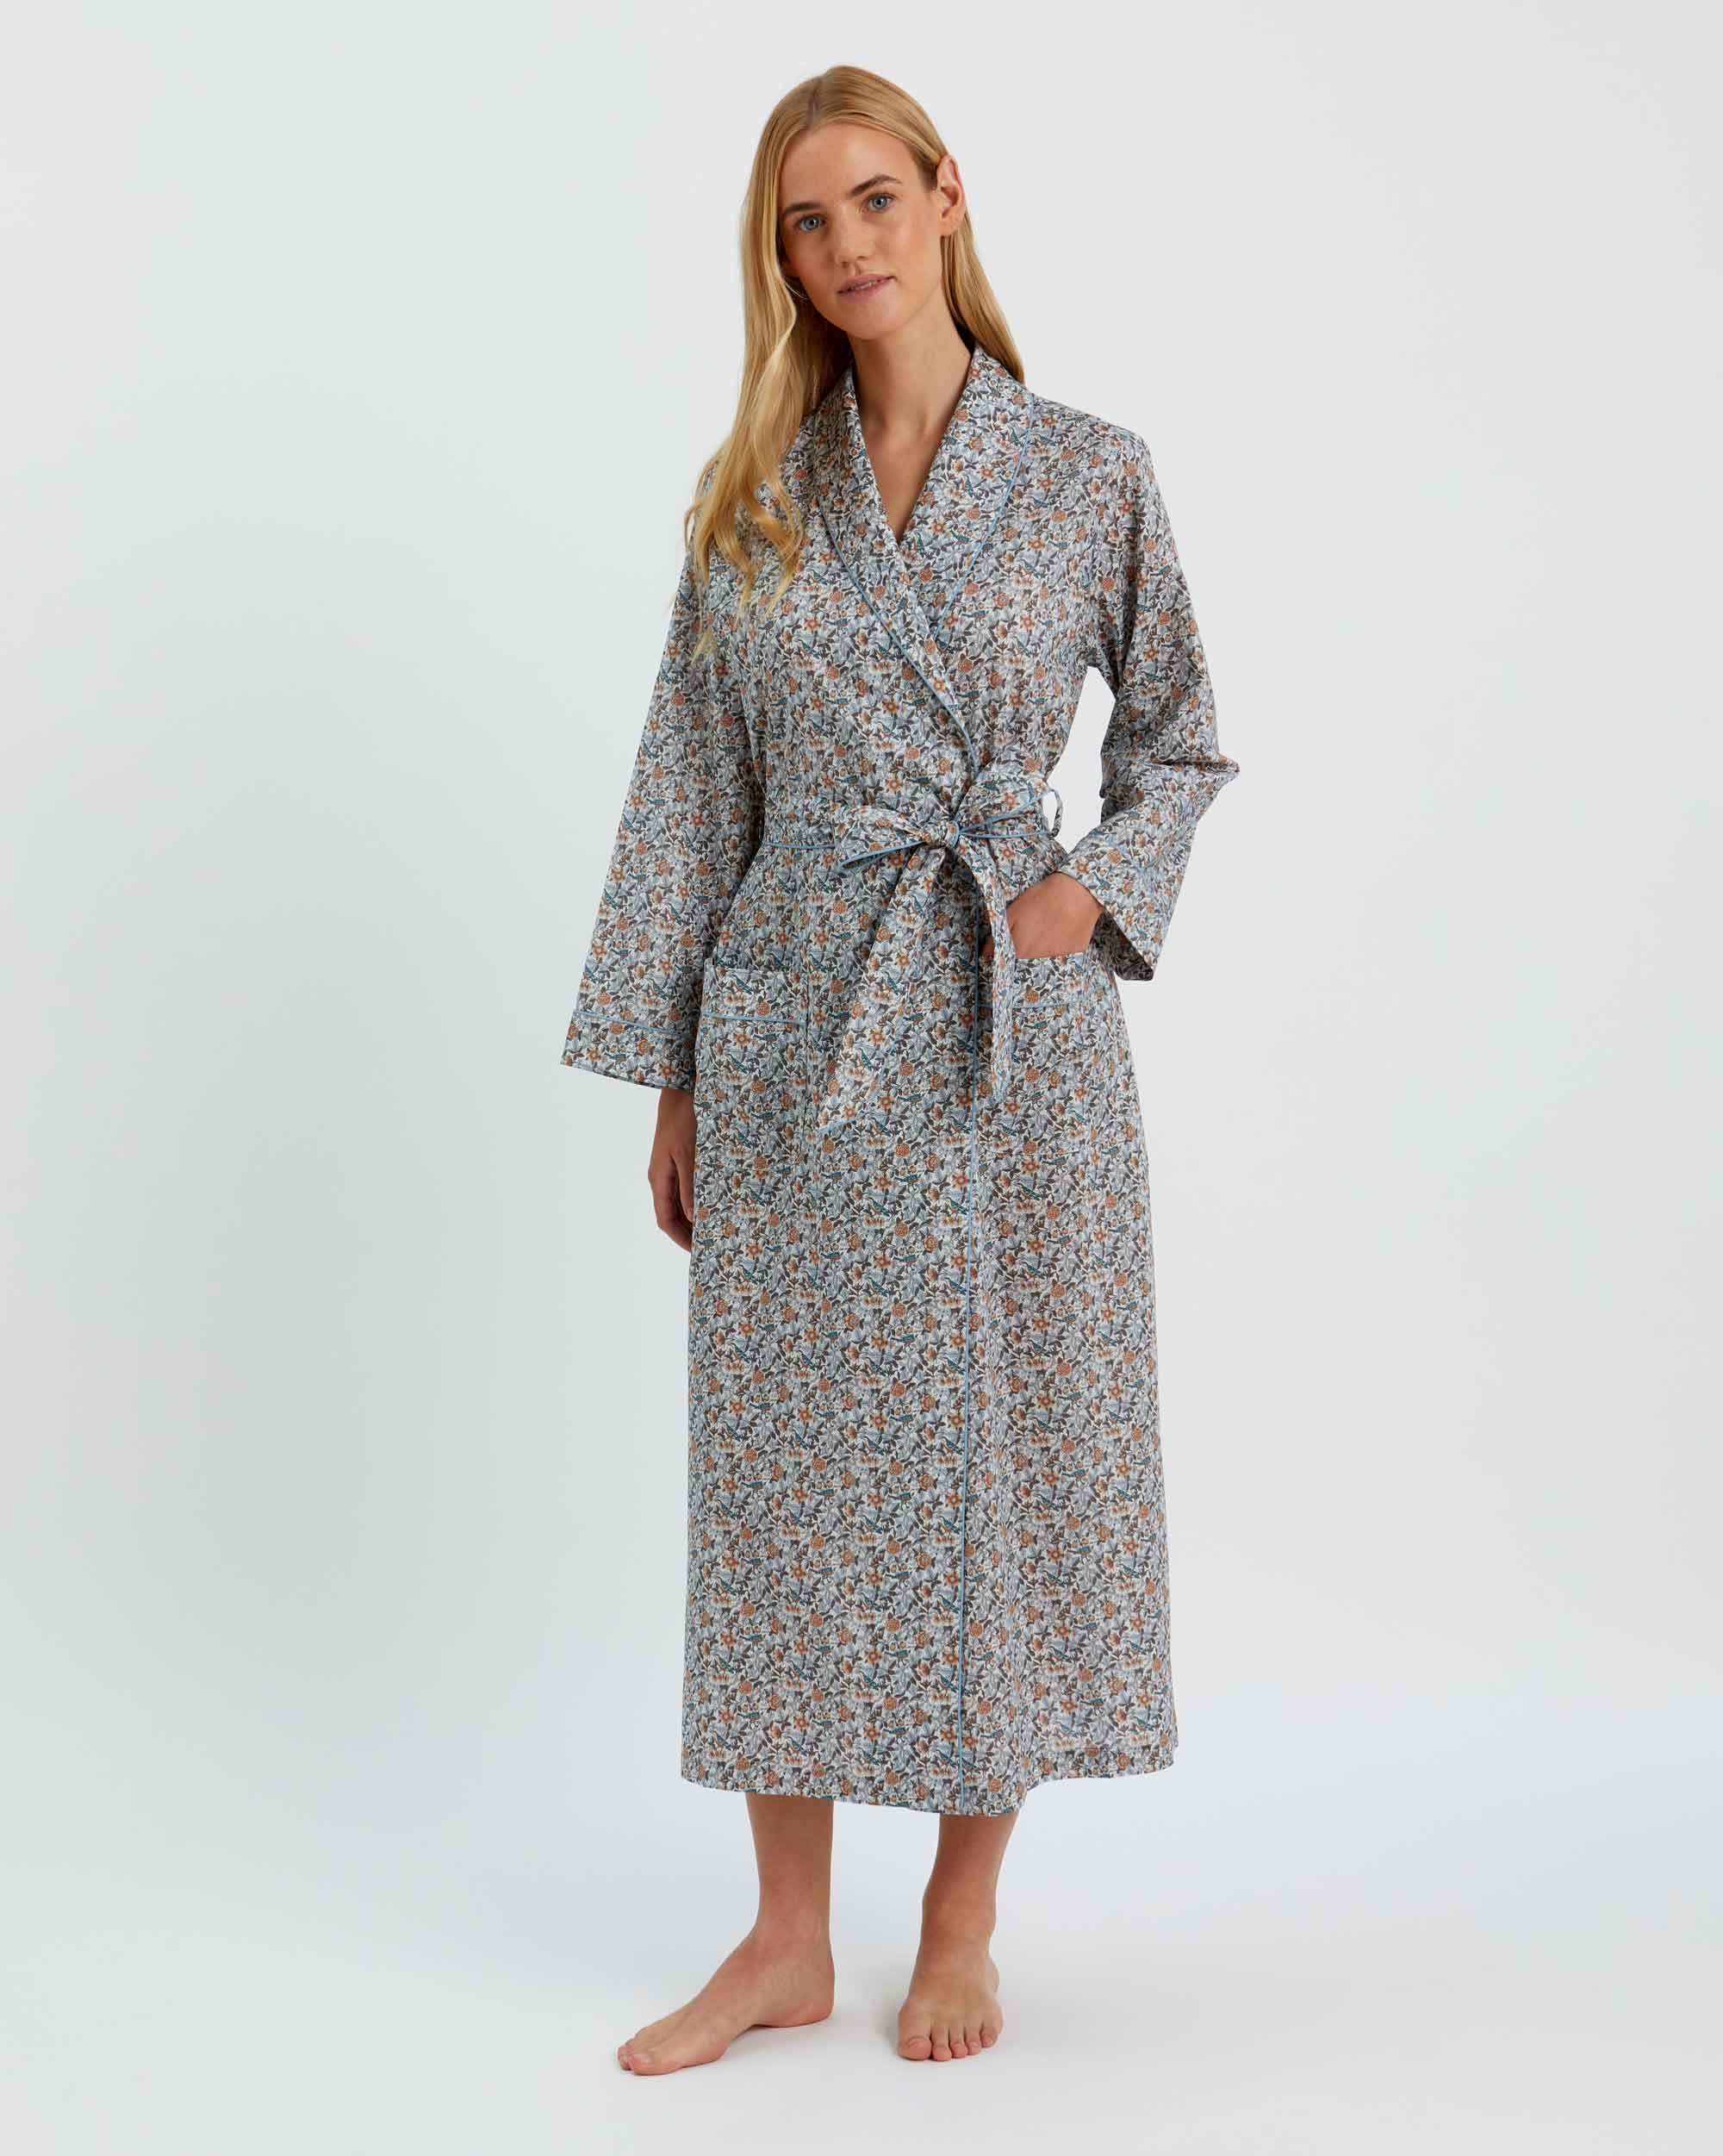 Susannah Cotton Women's Cotton Dressing Gown Kimono - Wild Flower | A  luxurious and stylish way to relax at home